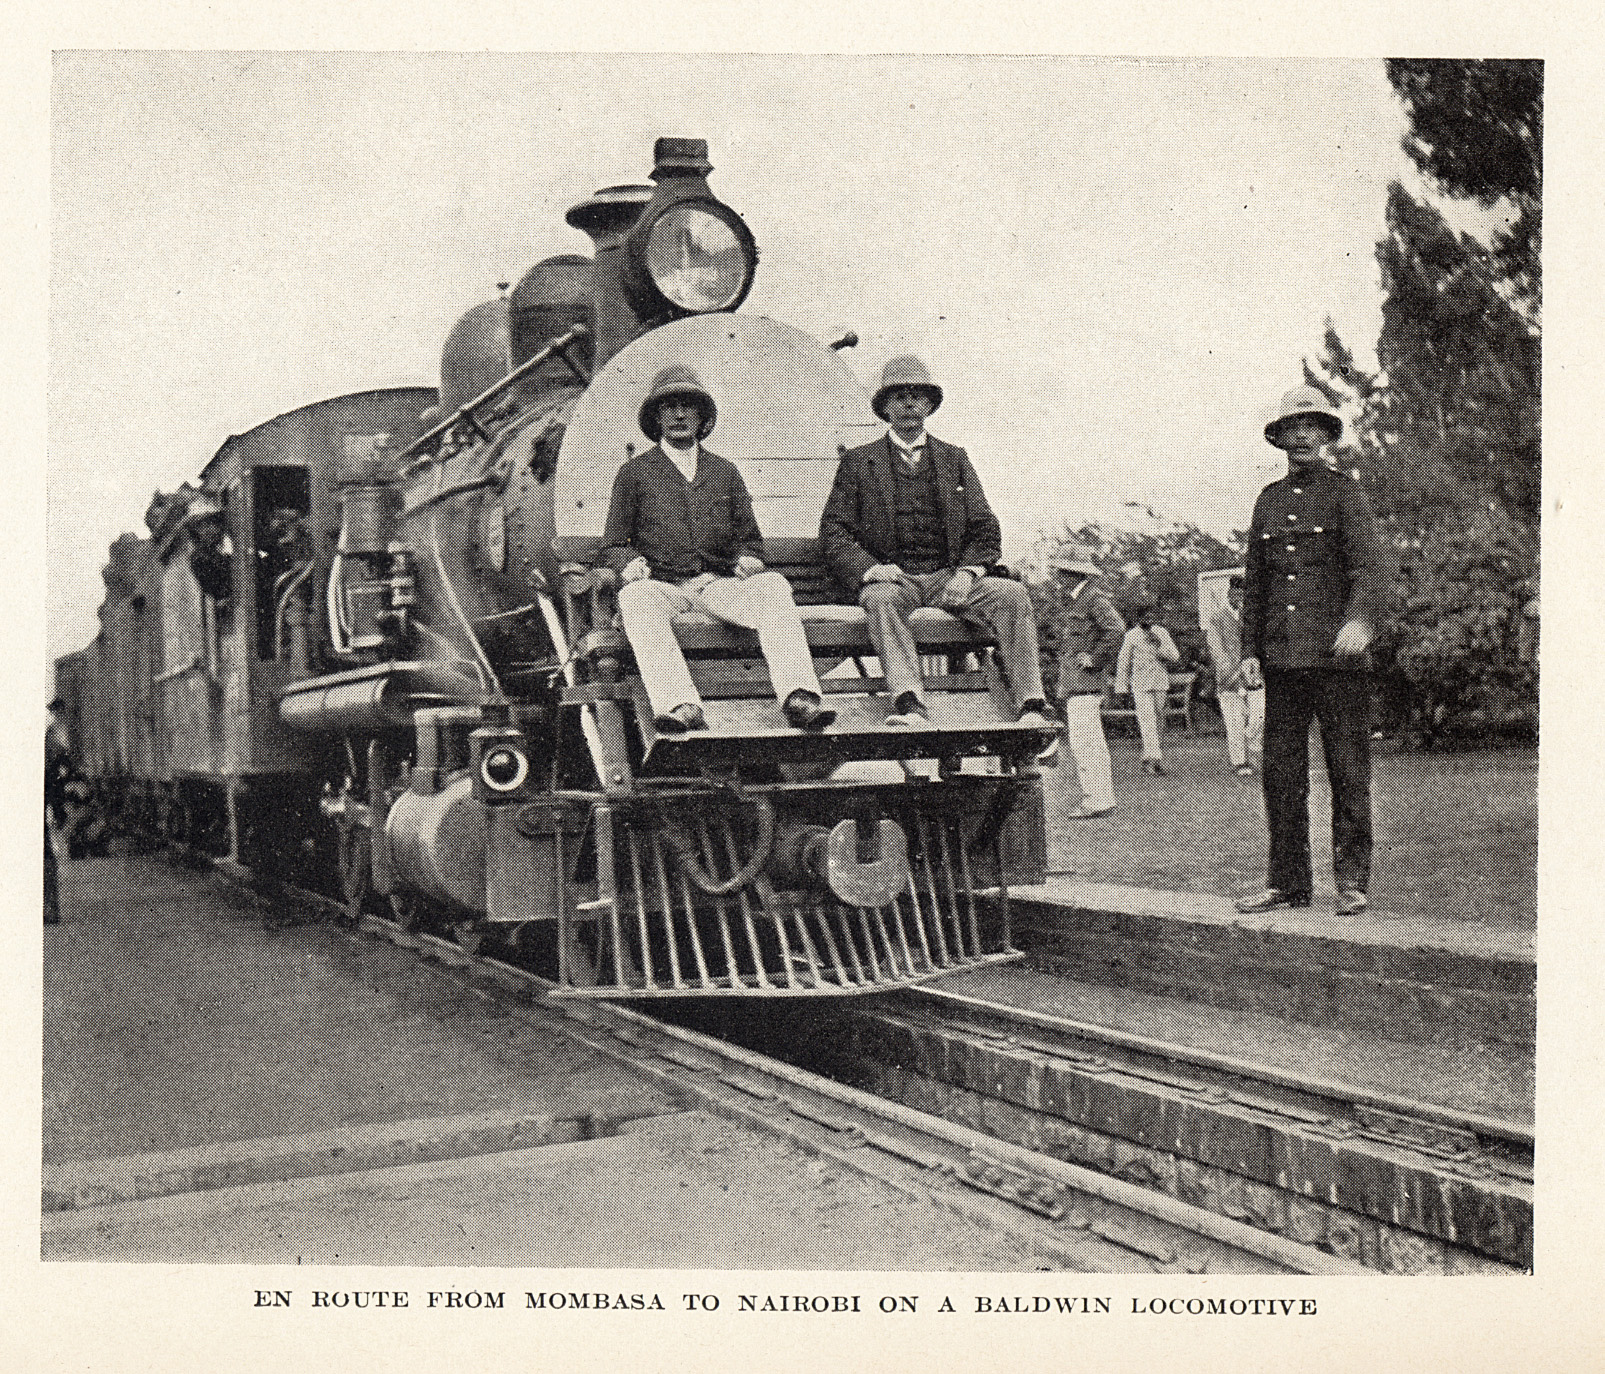 West Sussex railway section to enter reconstruction works